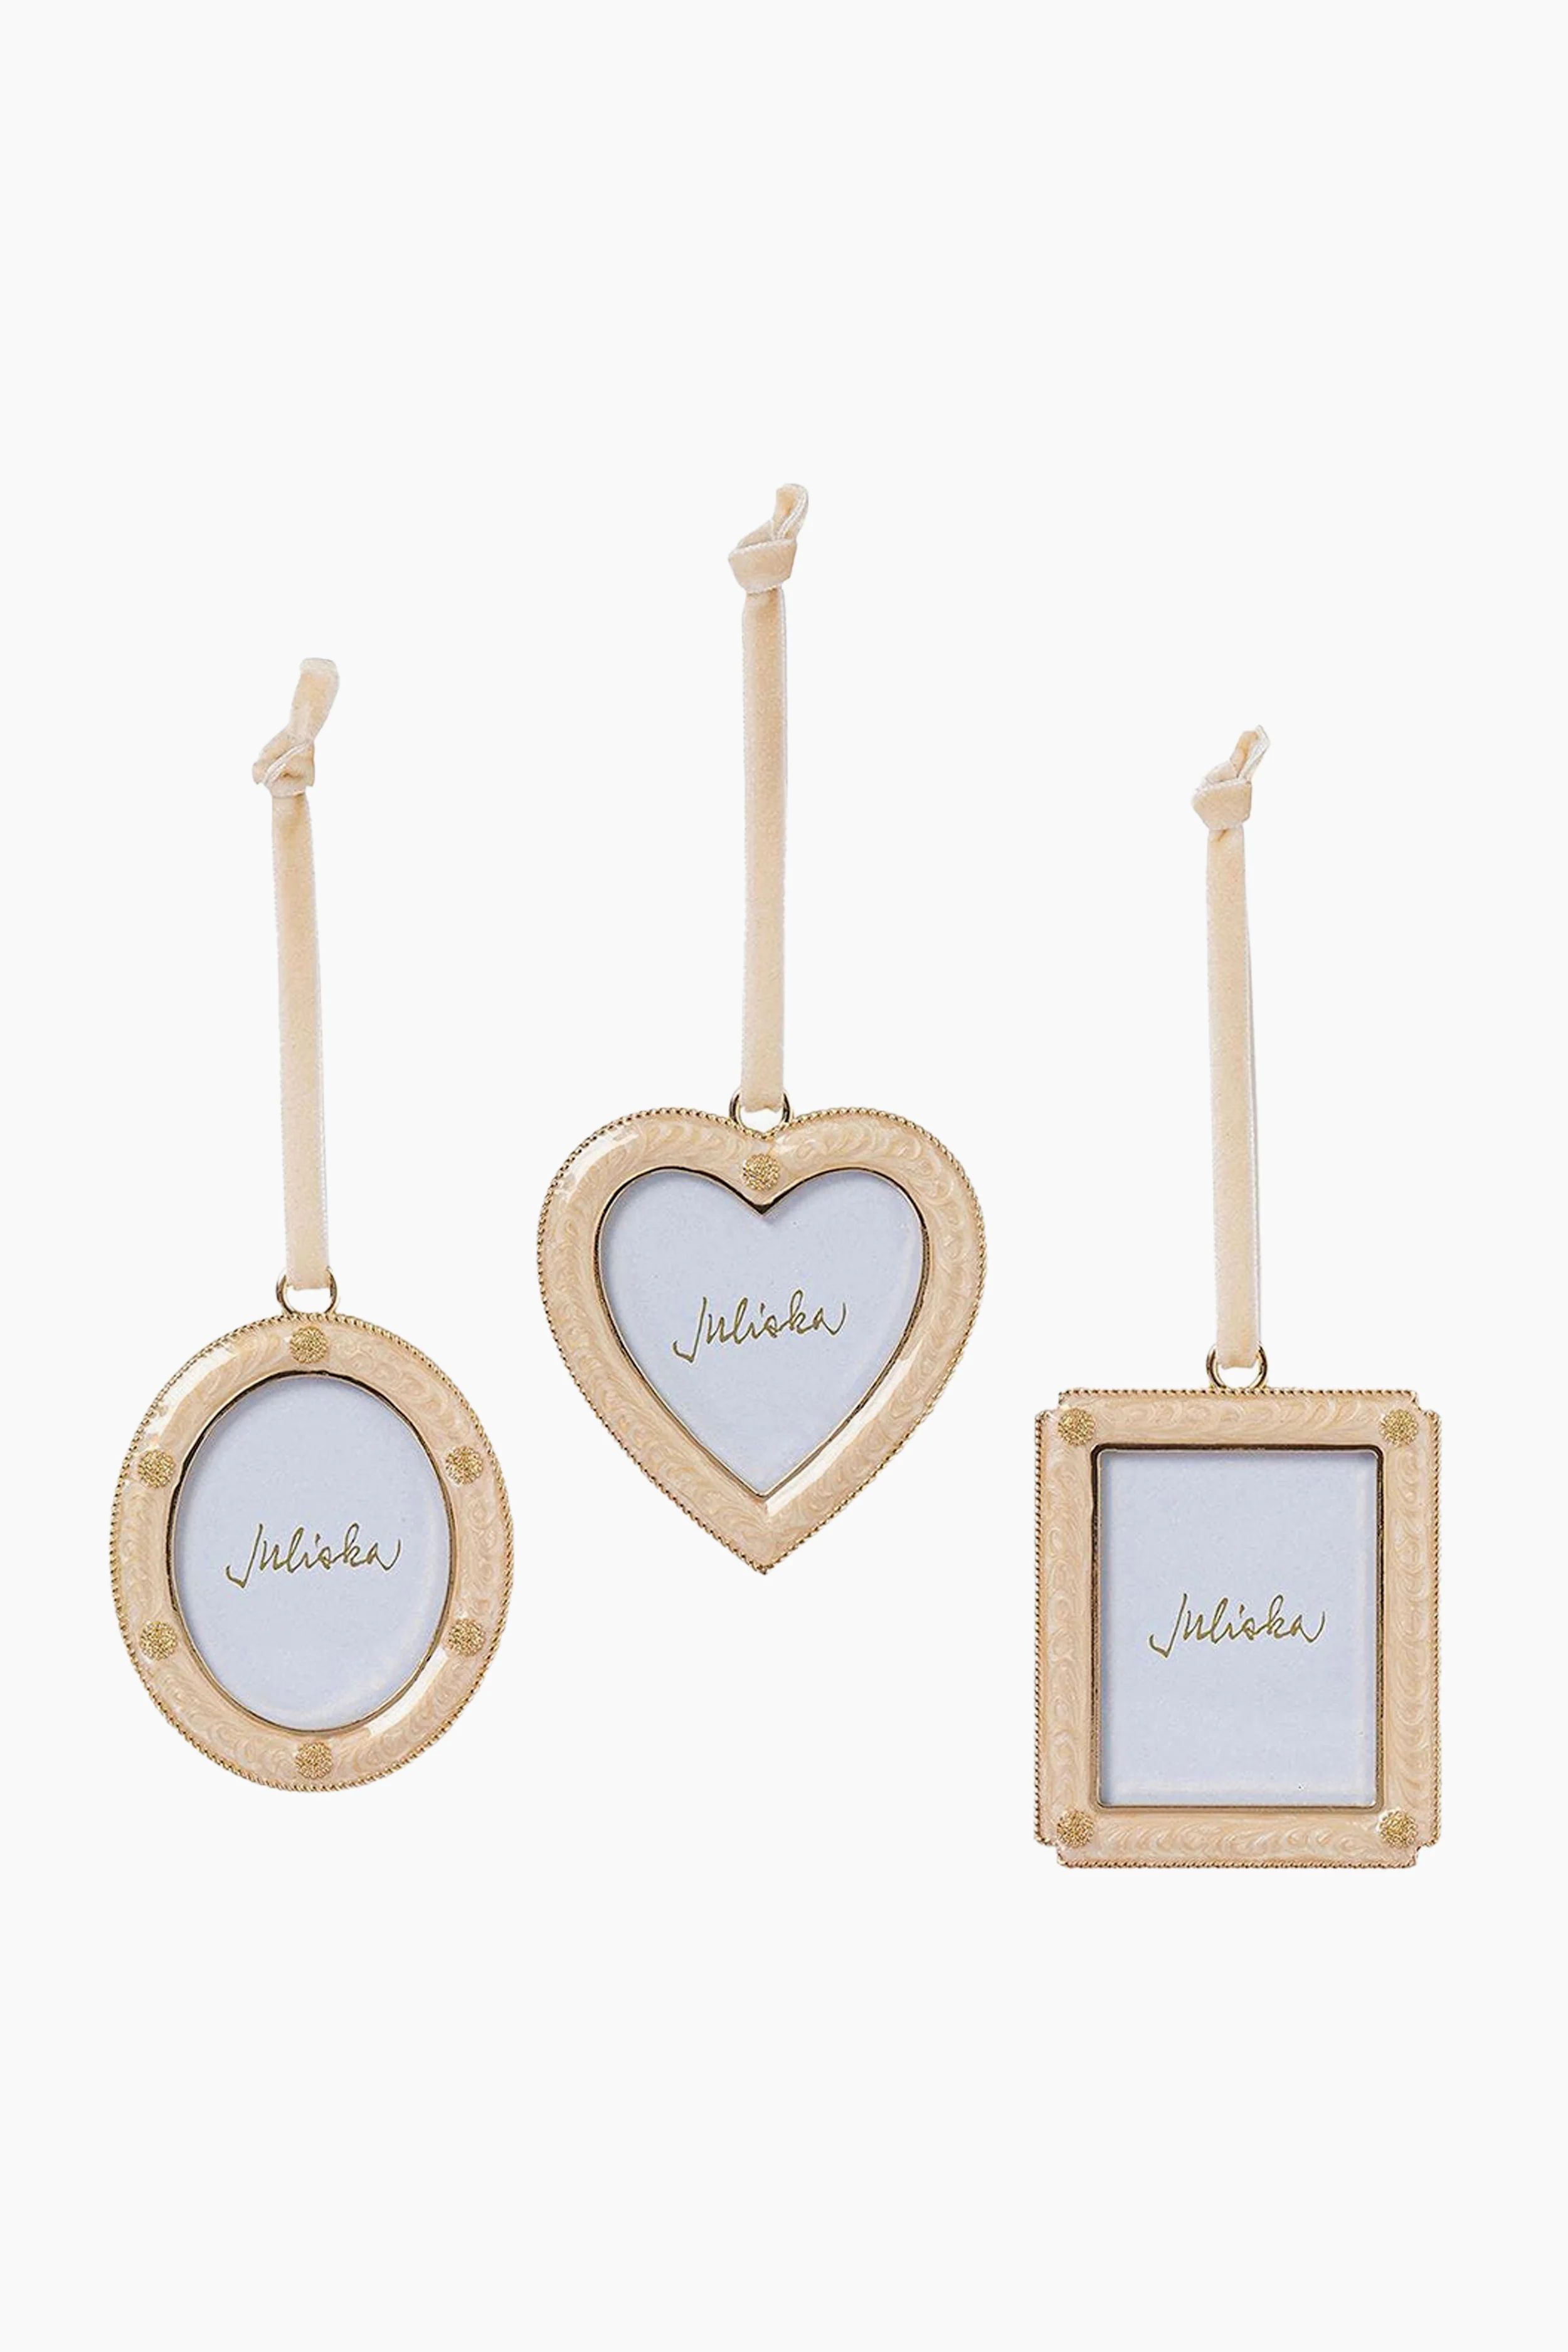 Champagne Berry and Thread Metal Frame Ornaments | Tuckernuck (US)